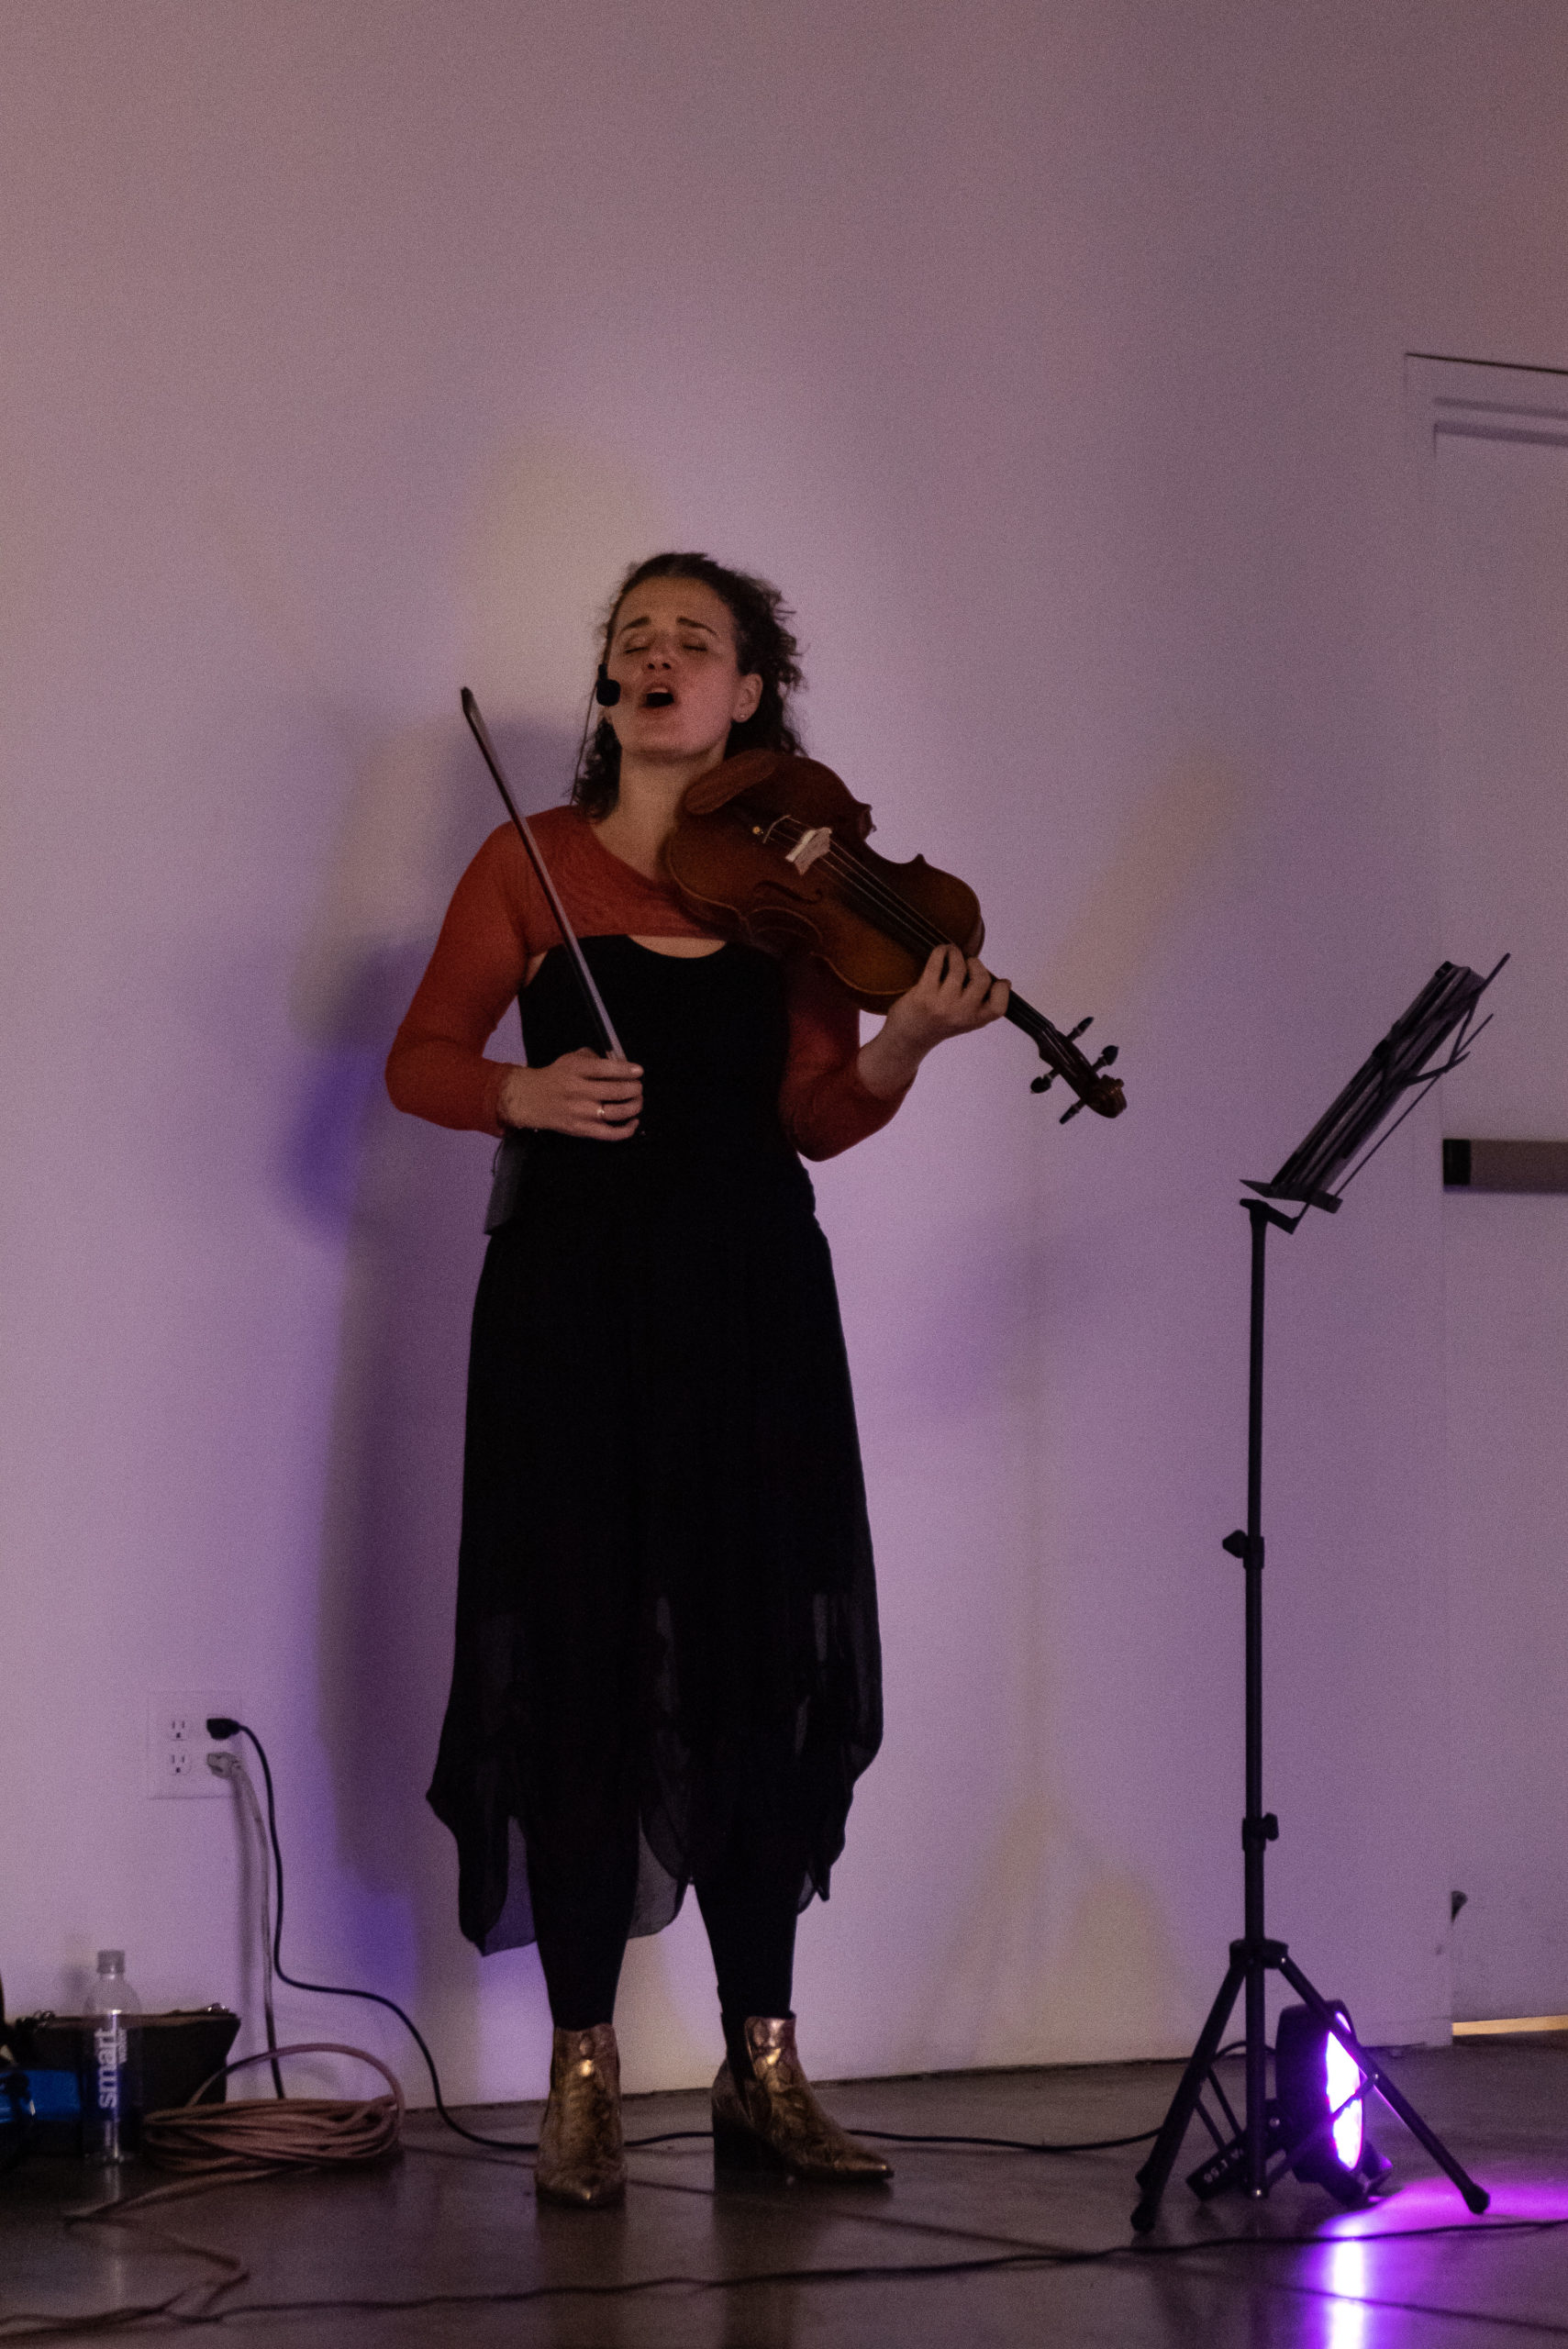 A woman standing, holding a violin, mouth agape, sings